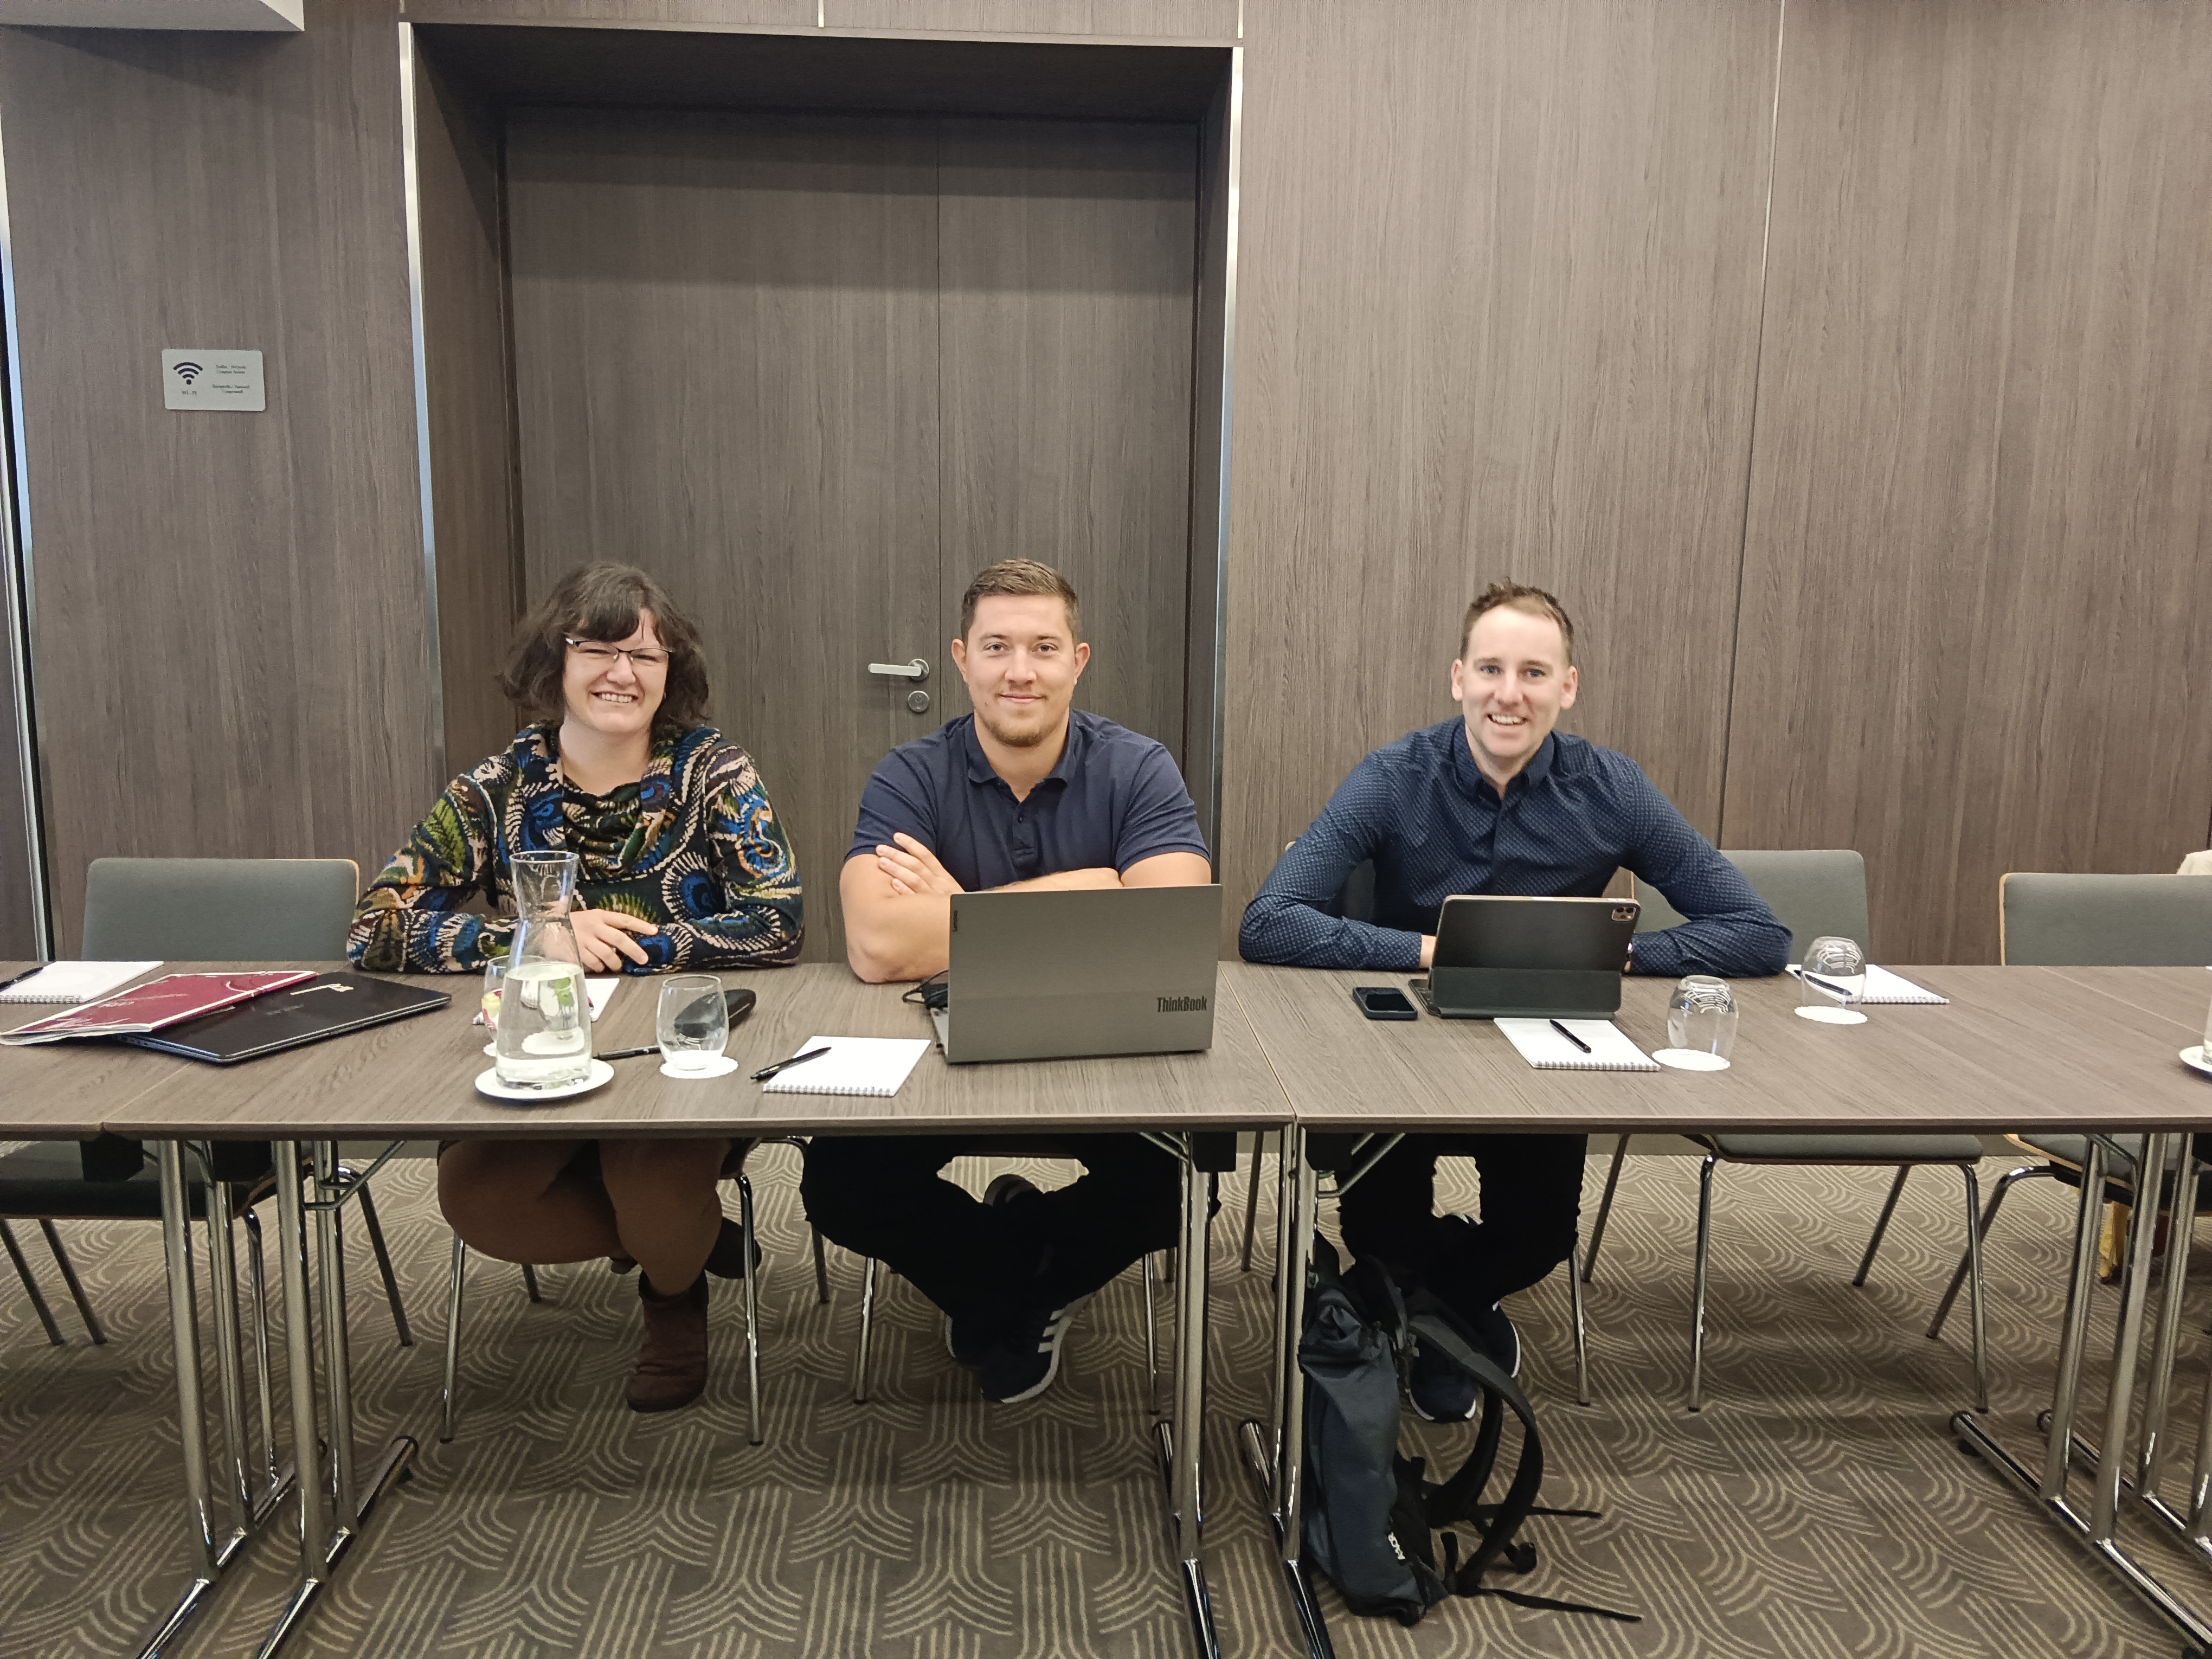 Starting on the 21st of September, CELSI researchers Monika Martišková, Patrik Gažo and Adam Šumichrast attended the 3-day  TURI (Trade Union Research Institute) conference in Vilnius